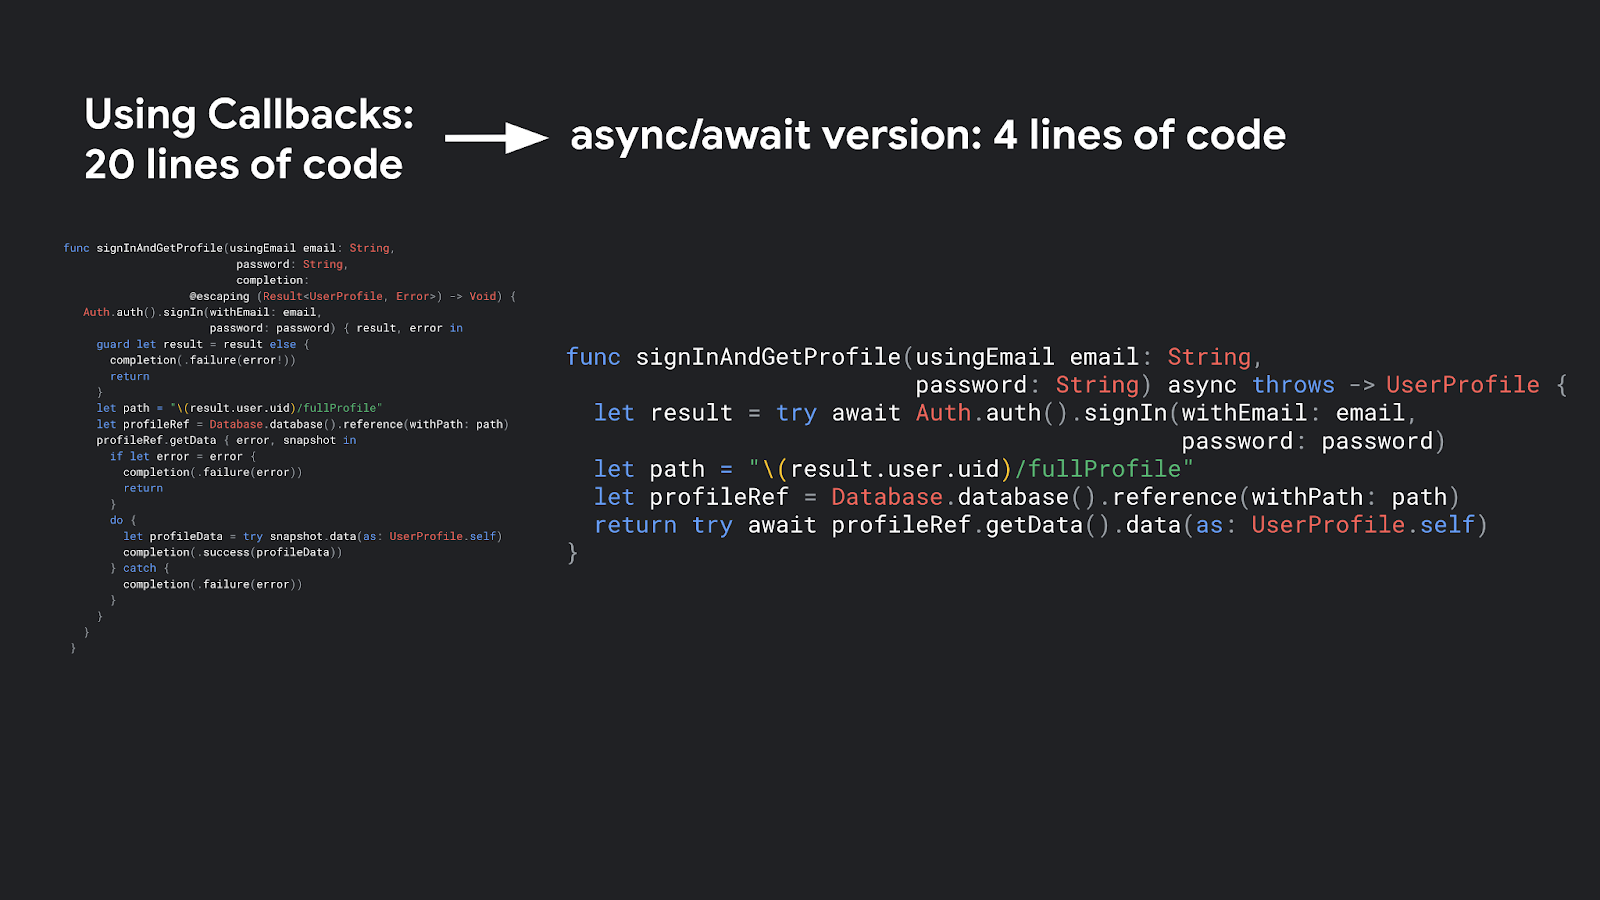 Using Callbacks takes 20 lines of code, while the async/await version is 4 lines of code